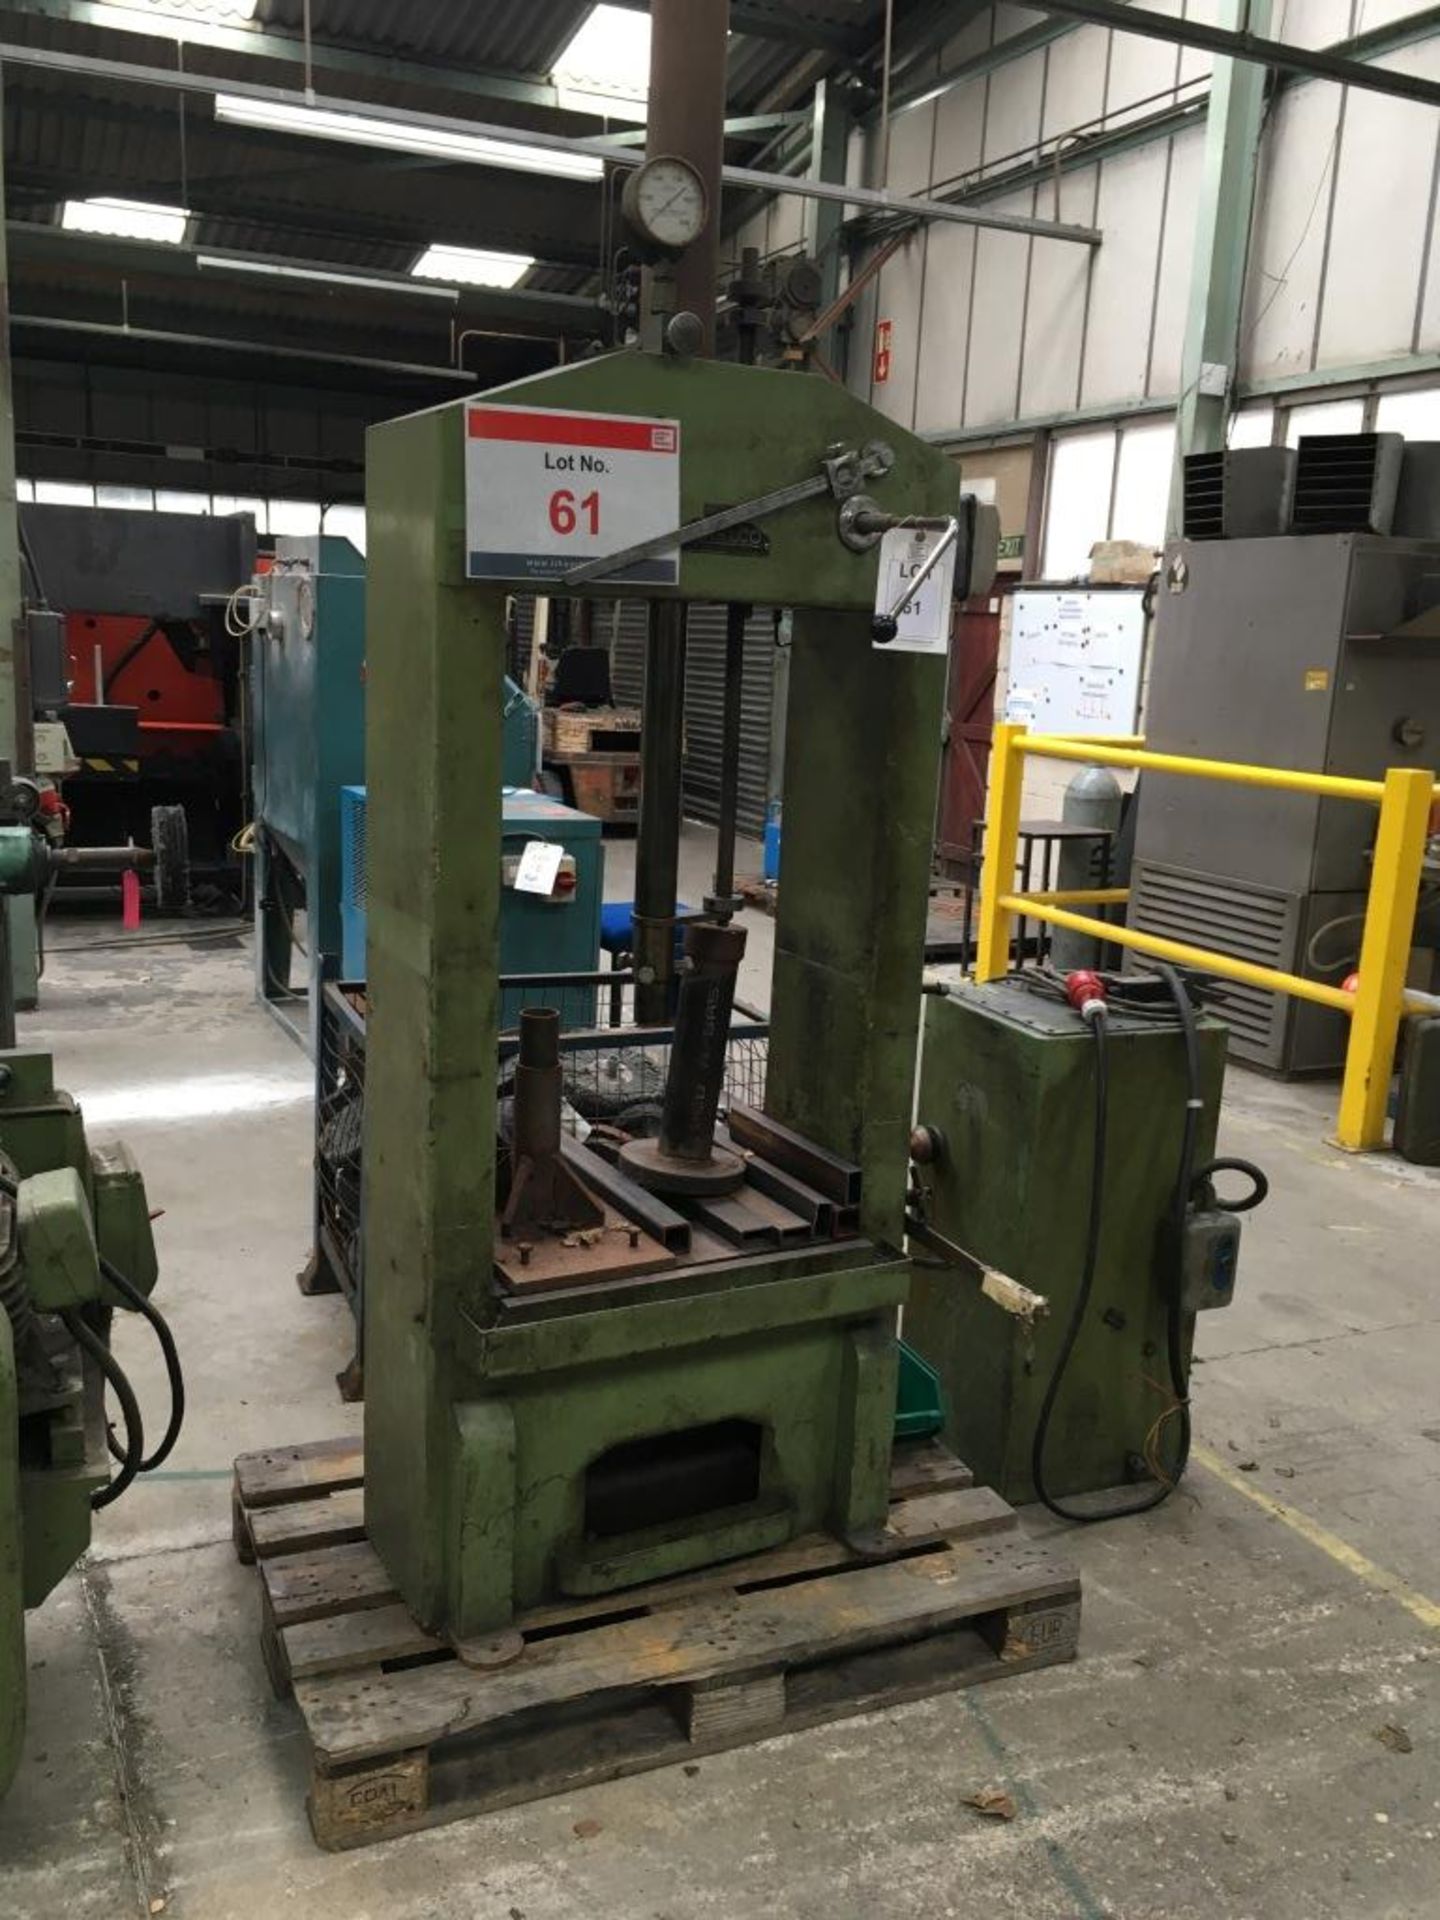 Marlco hydraulic press. The purchaser is required to satisfy themselves as to the safety of this - Image 2 of 3